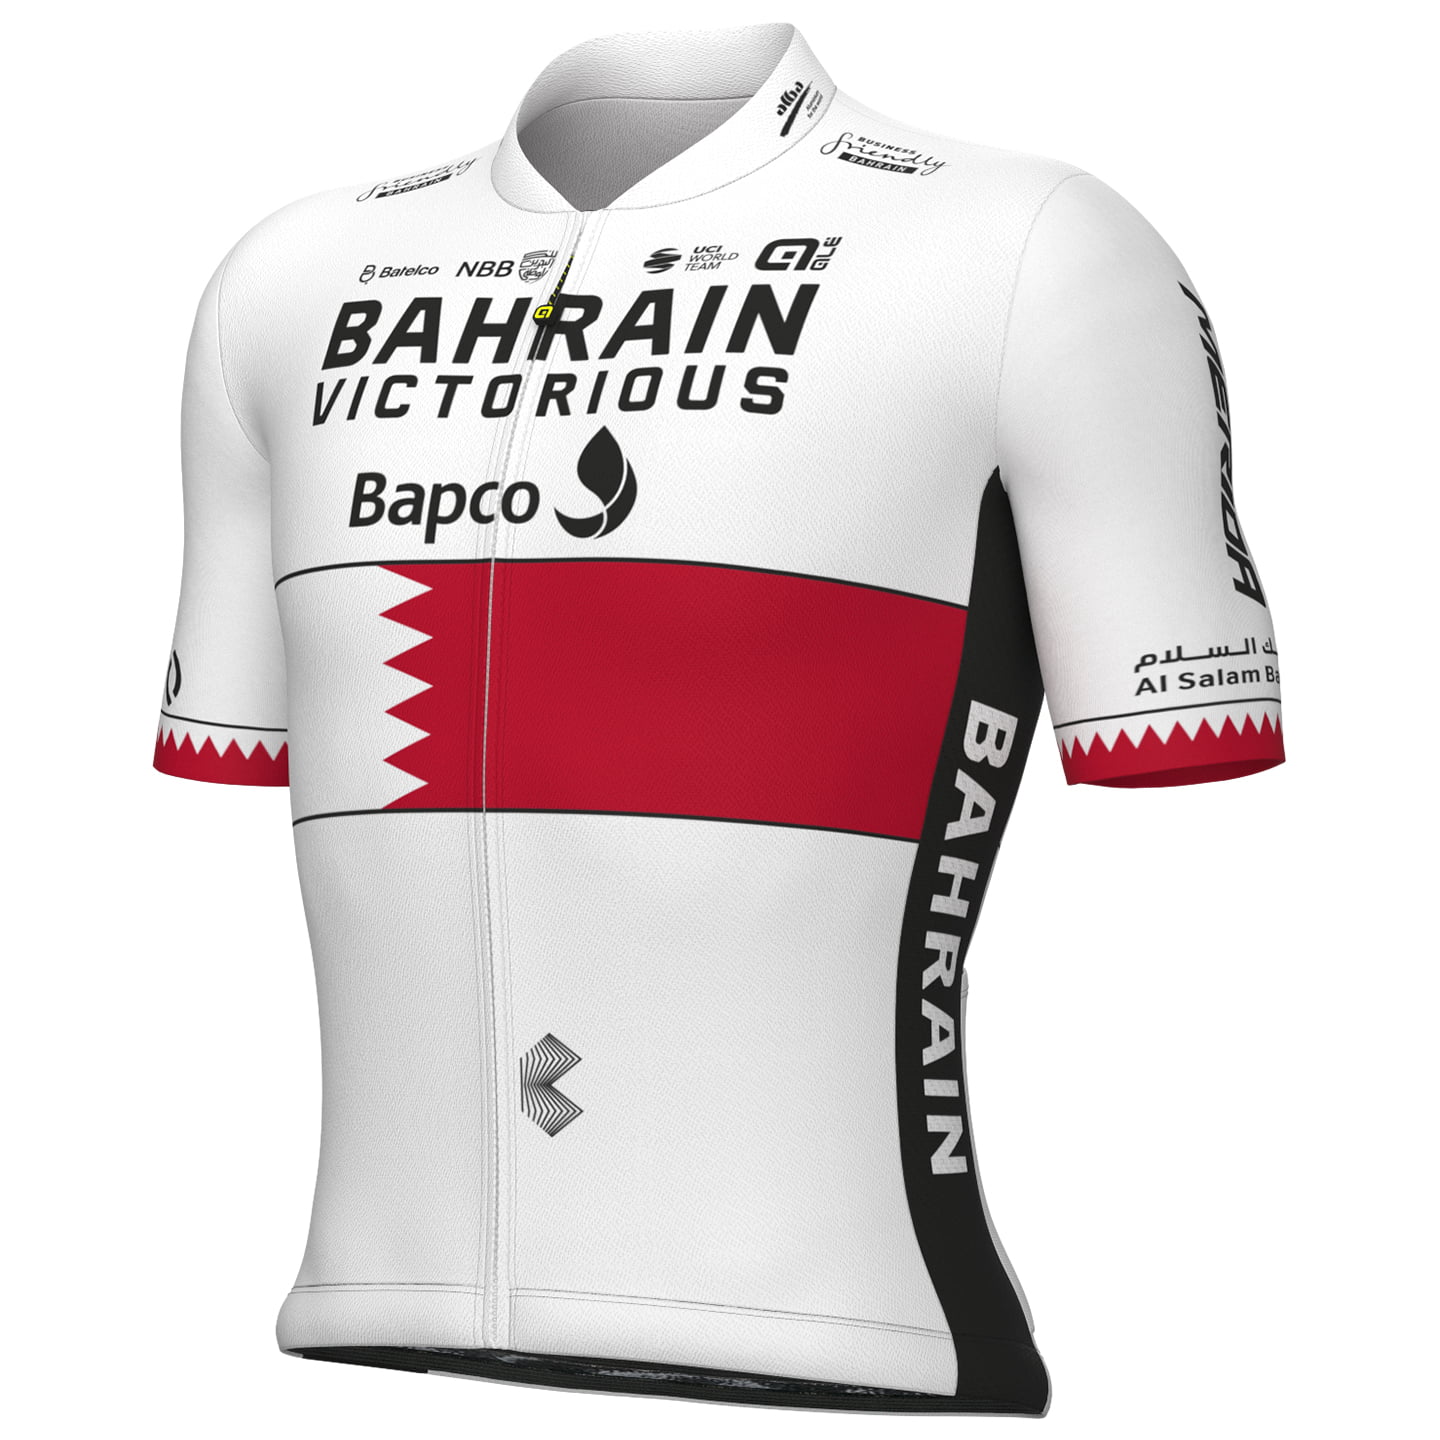 BAHRAIN - VICTORIOUS Bahraini champion 2023 Short Sleeve Jersey, for men, size L, Cycling shirt, Cycle clothing